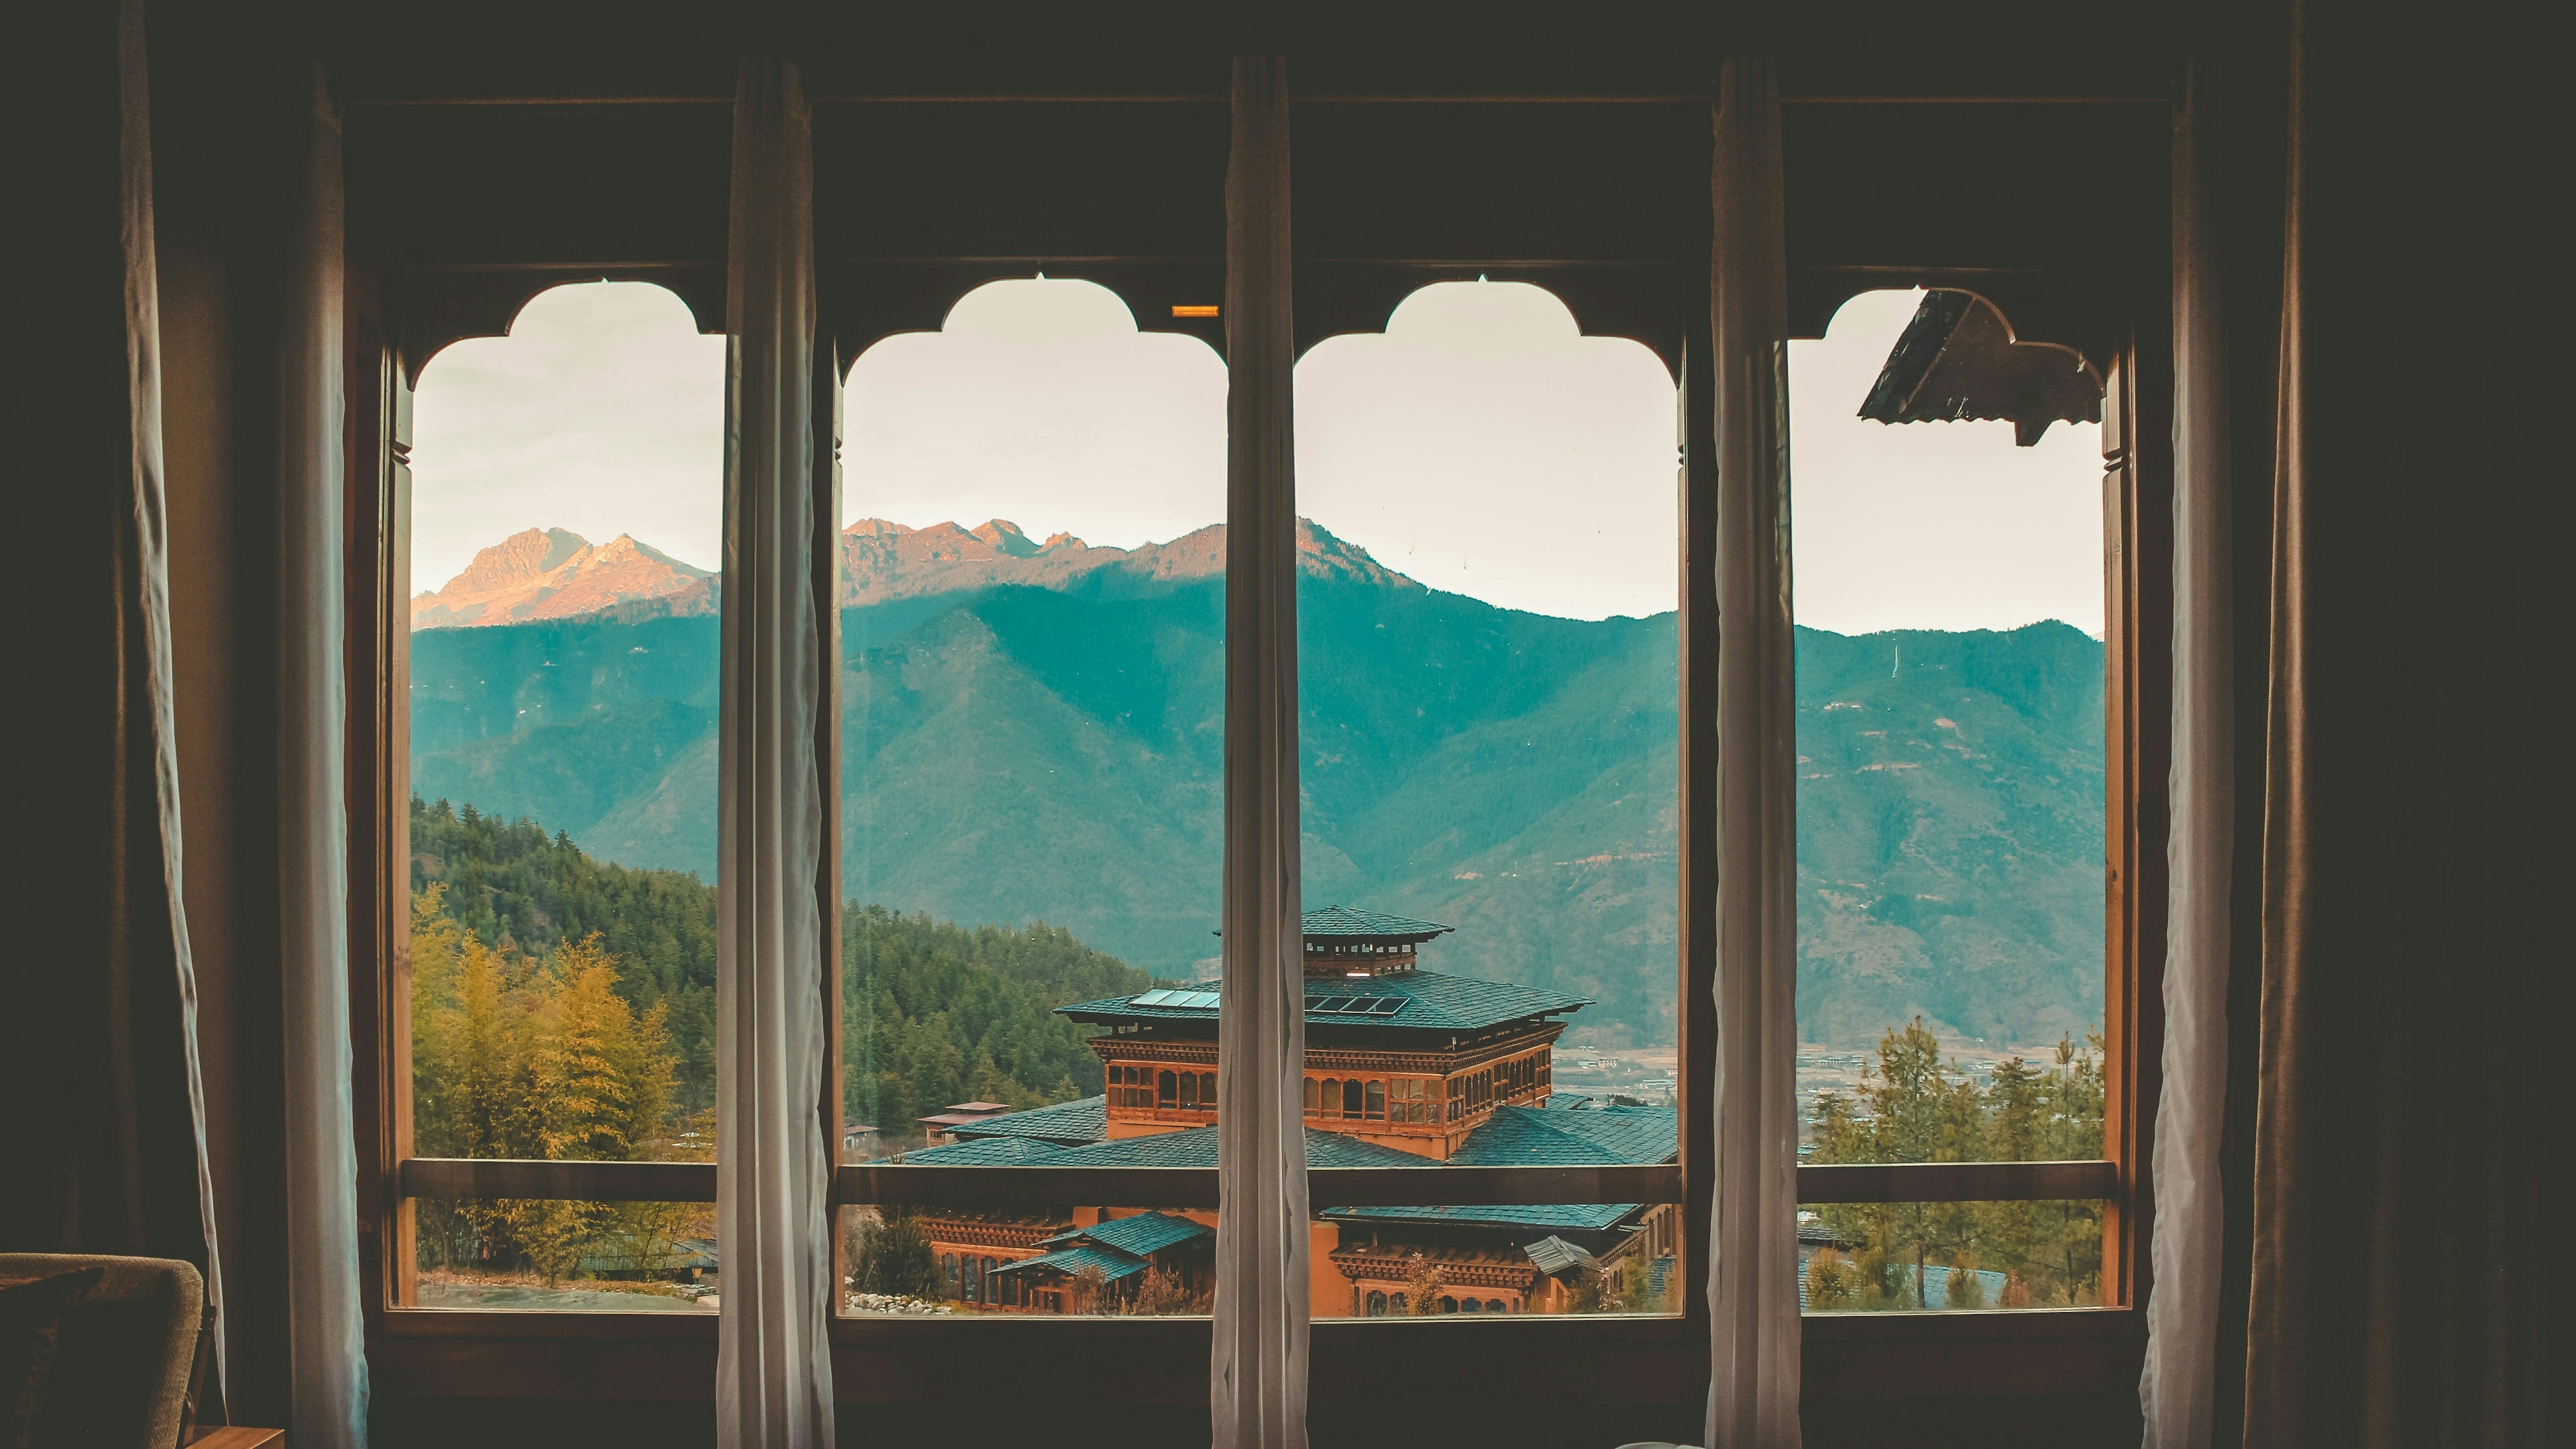 A hotel room with white curtains and wood floors looking out at a traditional building in front of mountains.